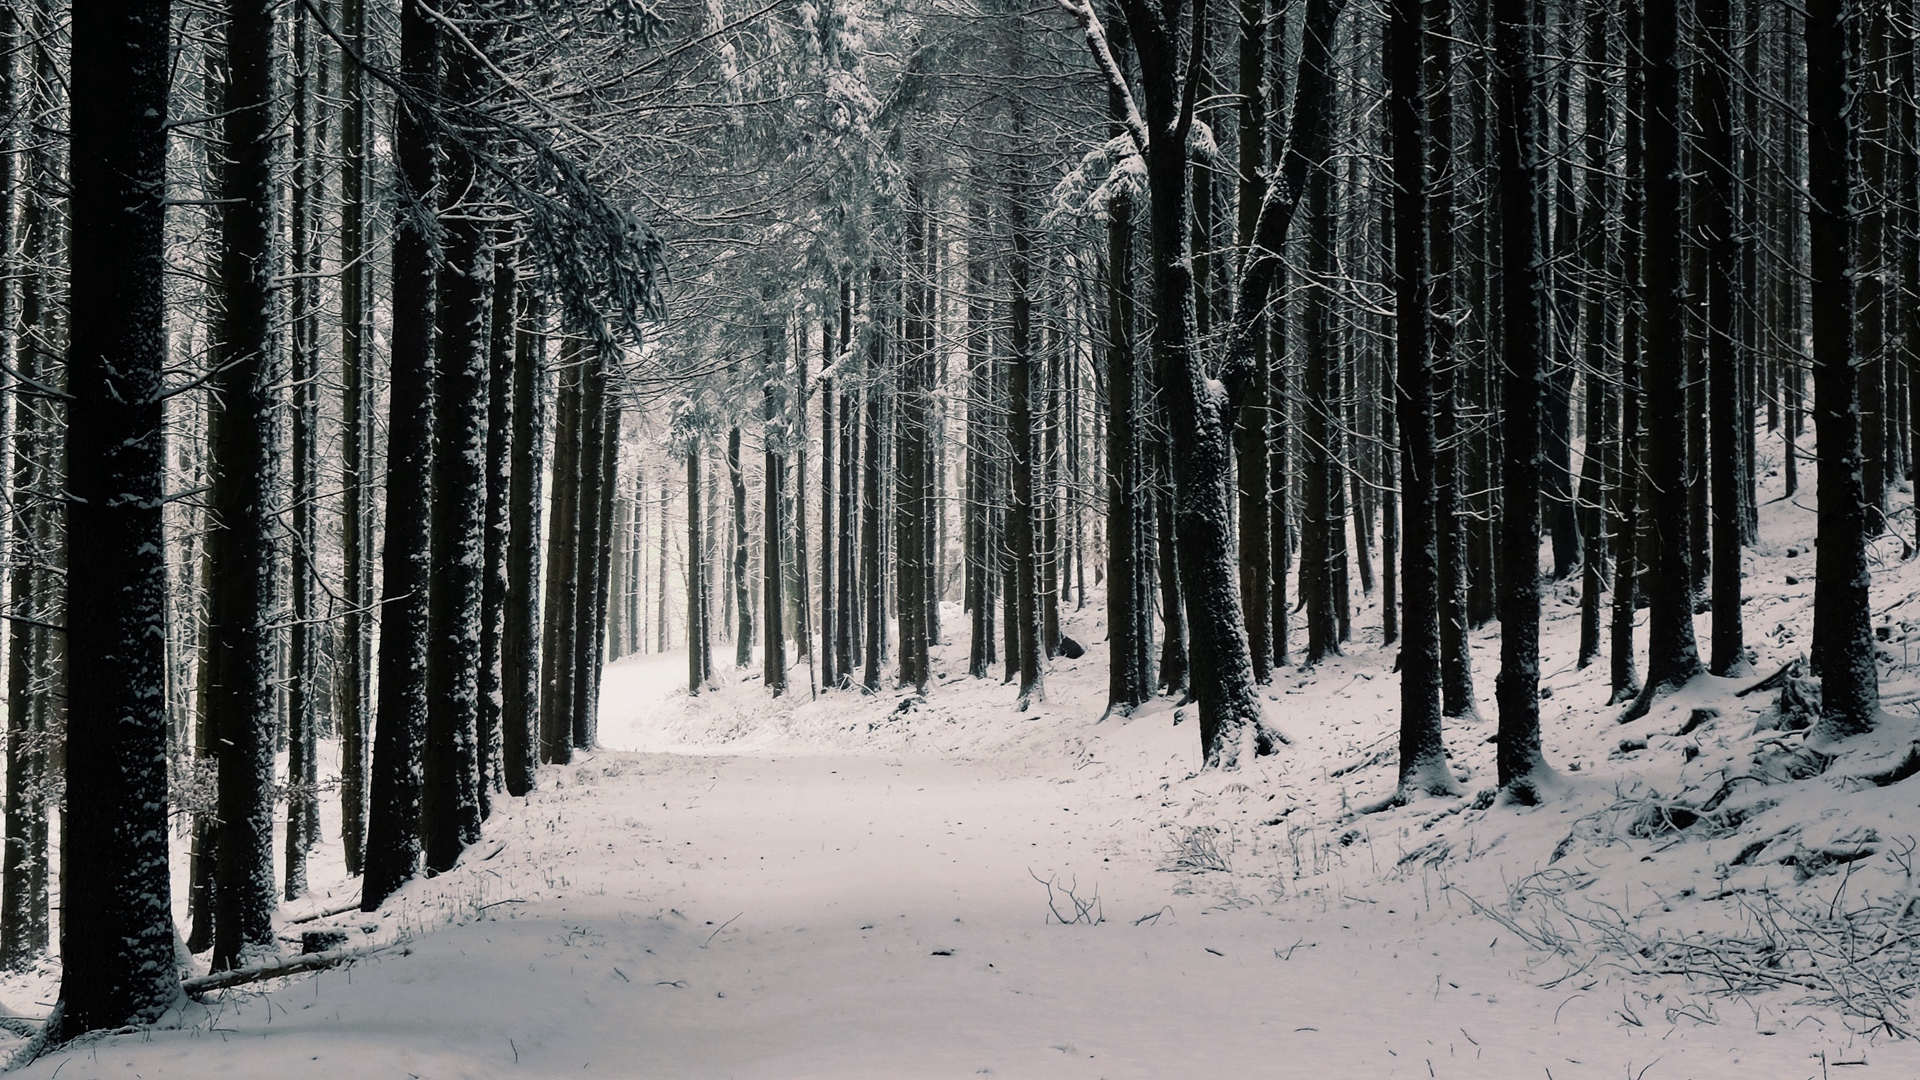 Download wallpaper 1920x1080 forest, trees, snow, winter